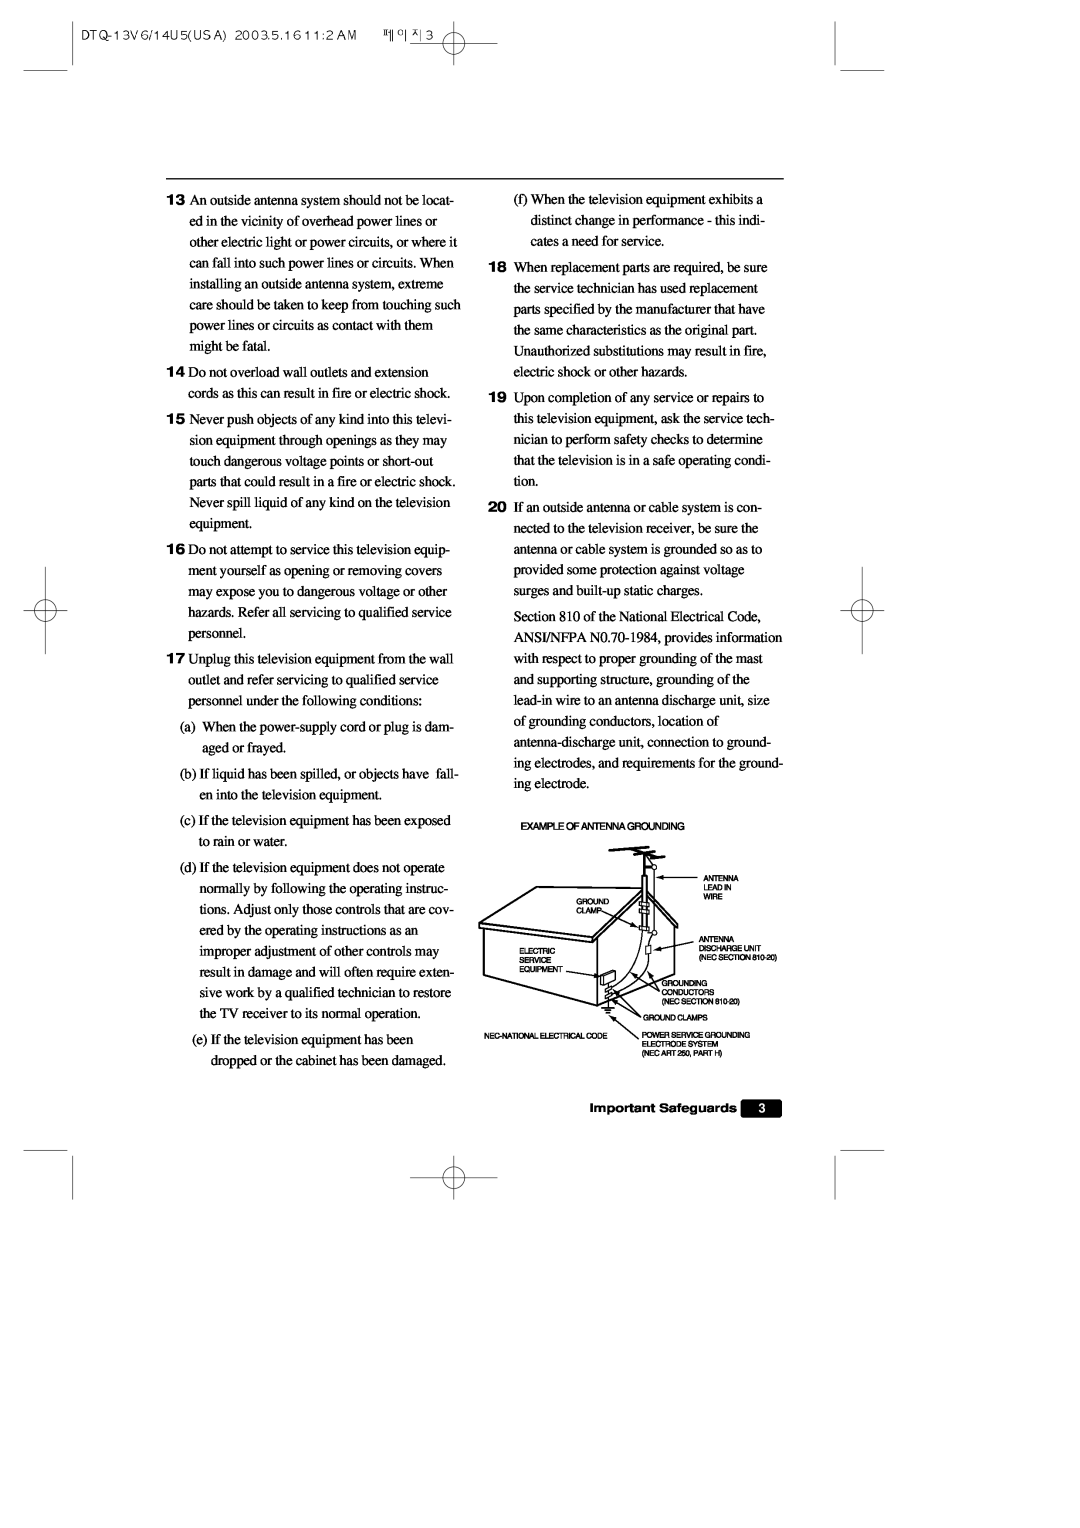 Daewoo DTQ 13V5FC, DTQ 13V1FC, DTQ 19V1FC instruction manual a When the power-supply cord or plug is dam- aged or frayed 